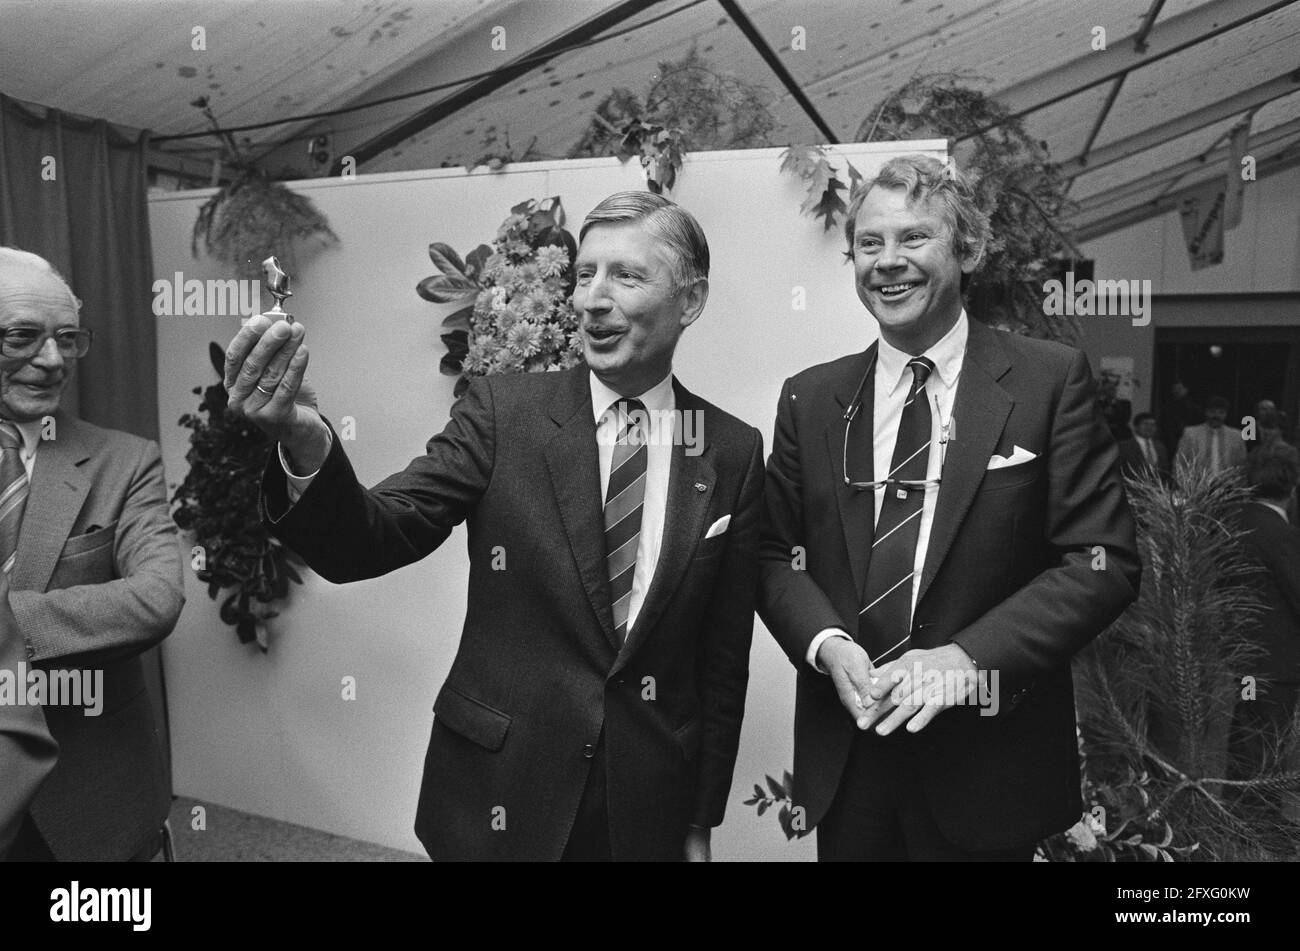 Van Agt receives golden wooden shoe at the opening of the Nat Klompenbeurs in St Oedenrode, the tour of the fair was done by Mr. Van Agt on wooden shoes, 5 October 1984, KLOMPEN, Openings, tours, The Netherlands, 20th century press agency photo, news to remember, documentary, historic photography 1945-1990, visual stories, human history of the Twentieth Century, capturing moments in time Stock Photo